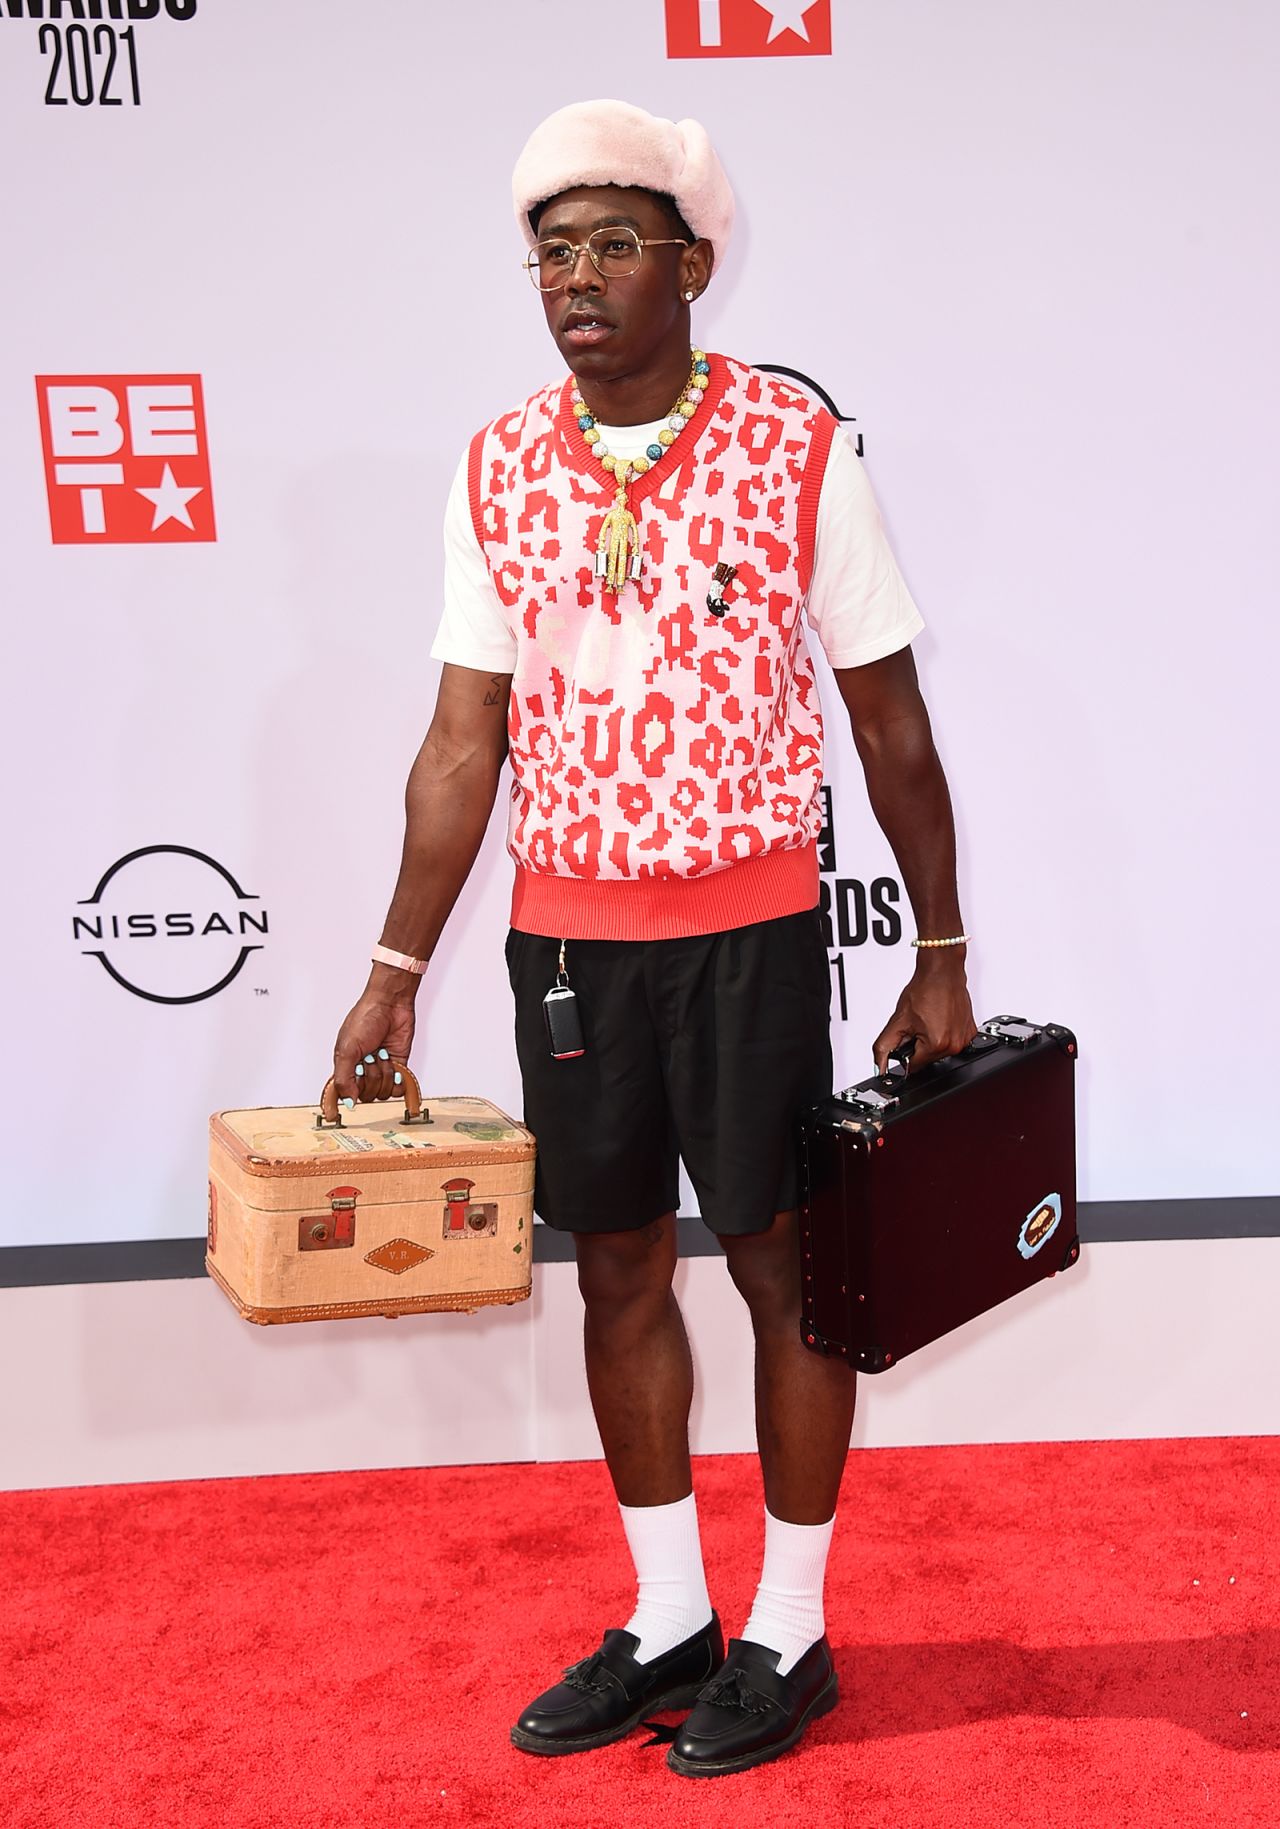 Lil Nas X wows BET Awards 2021 red carpet in elaborate gown | CNN